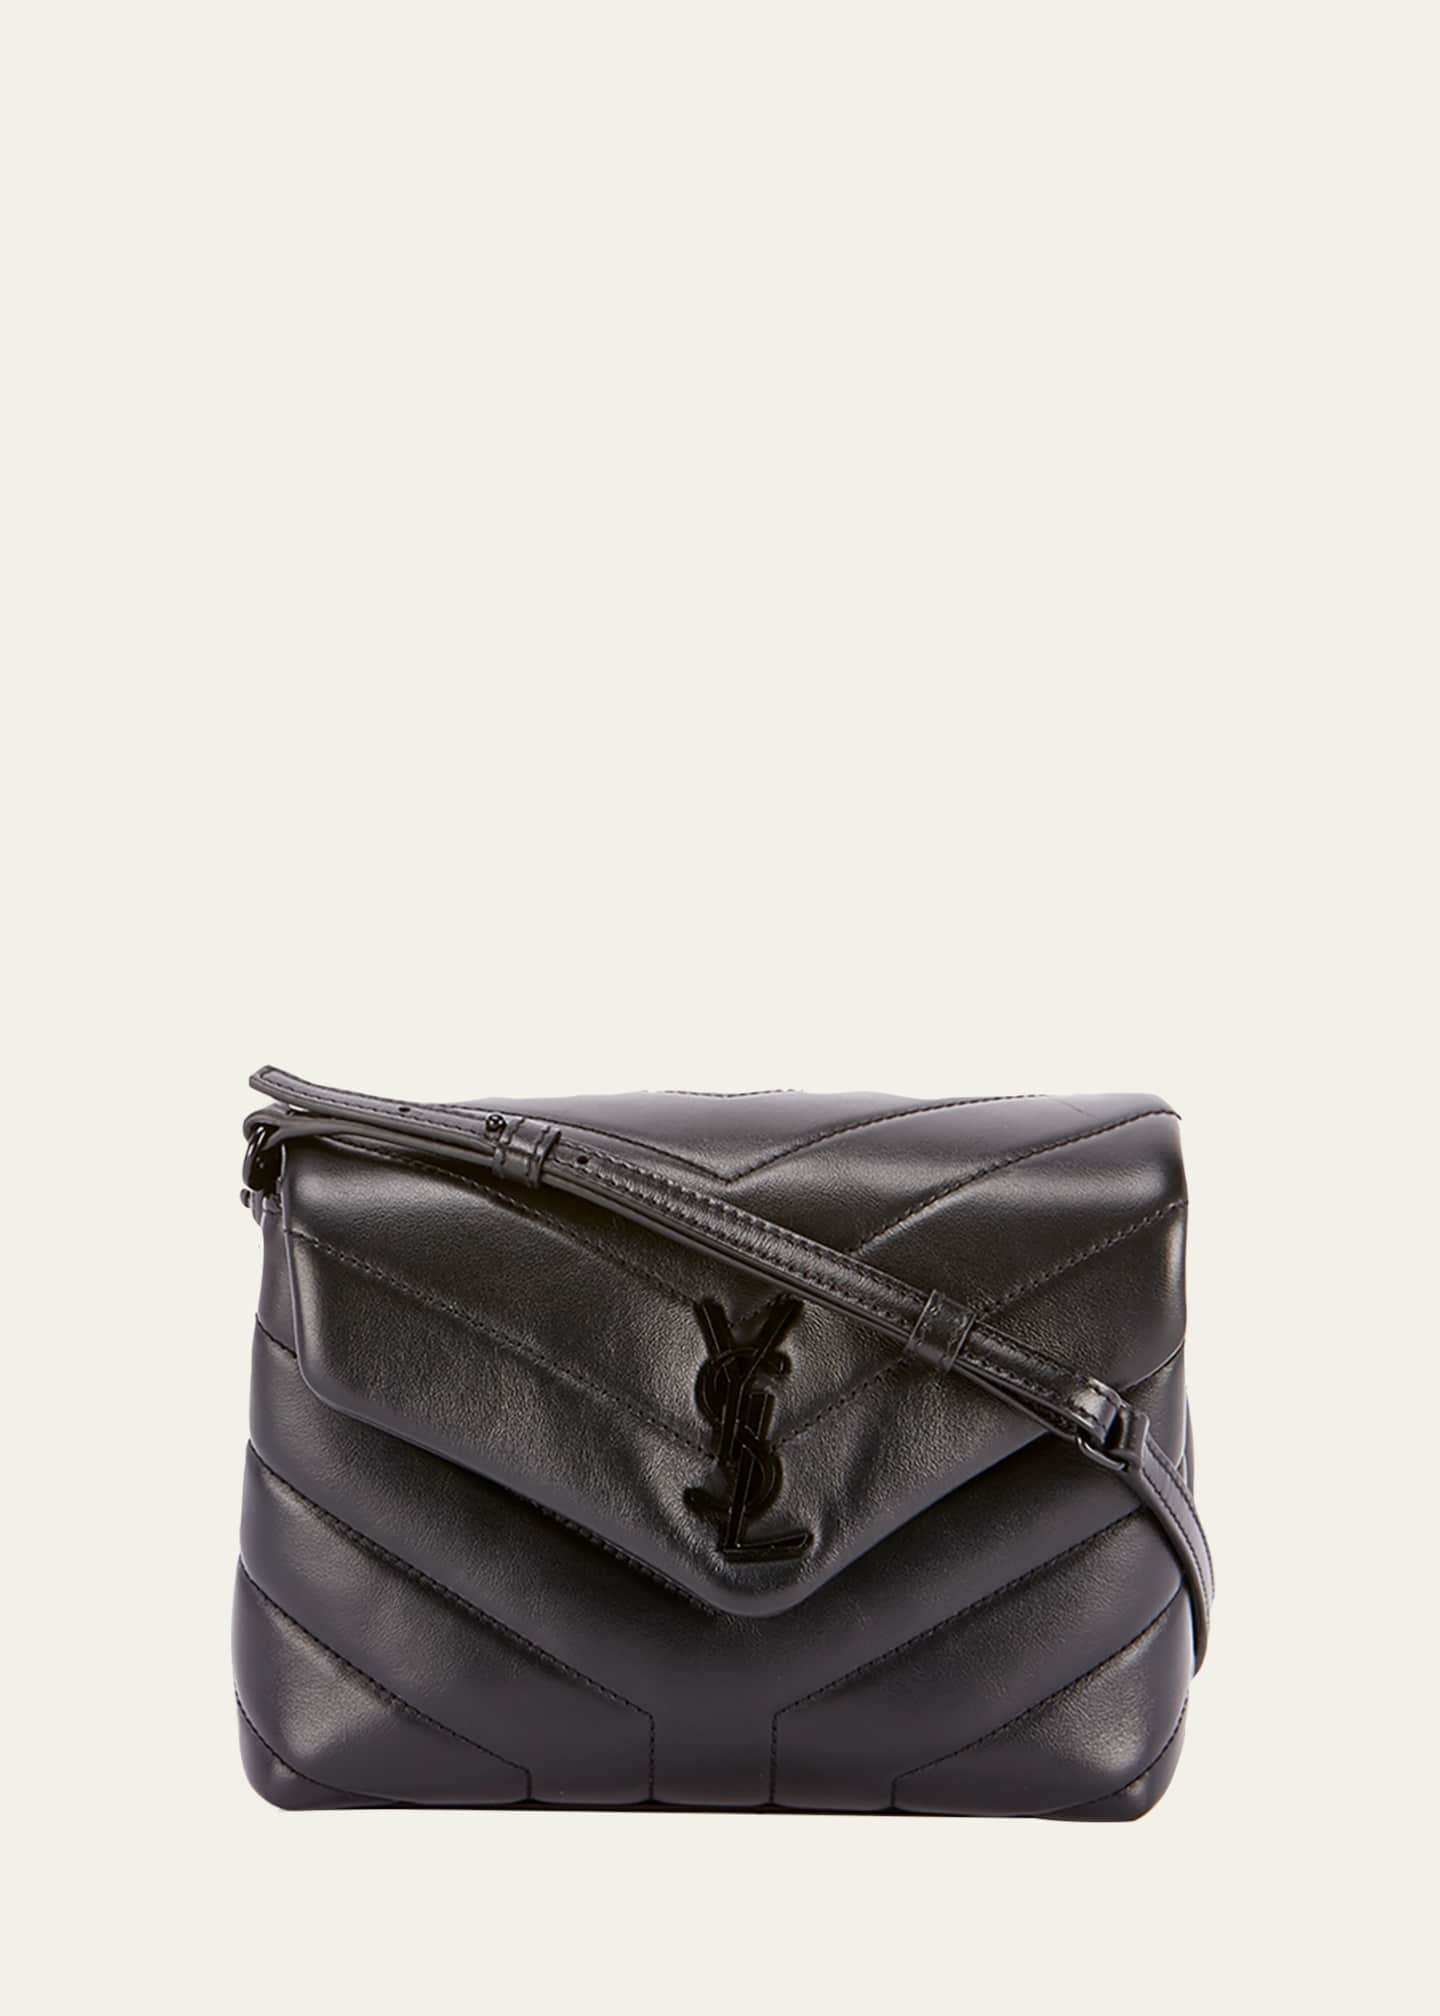 LOULOU toy STRAP bag in quilted Y leather, Saint Laurent